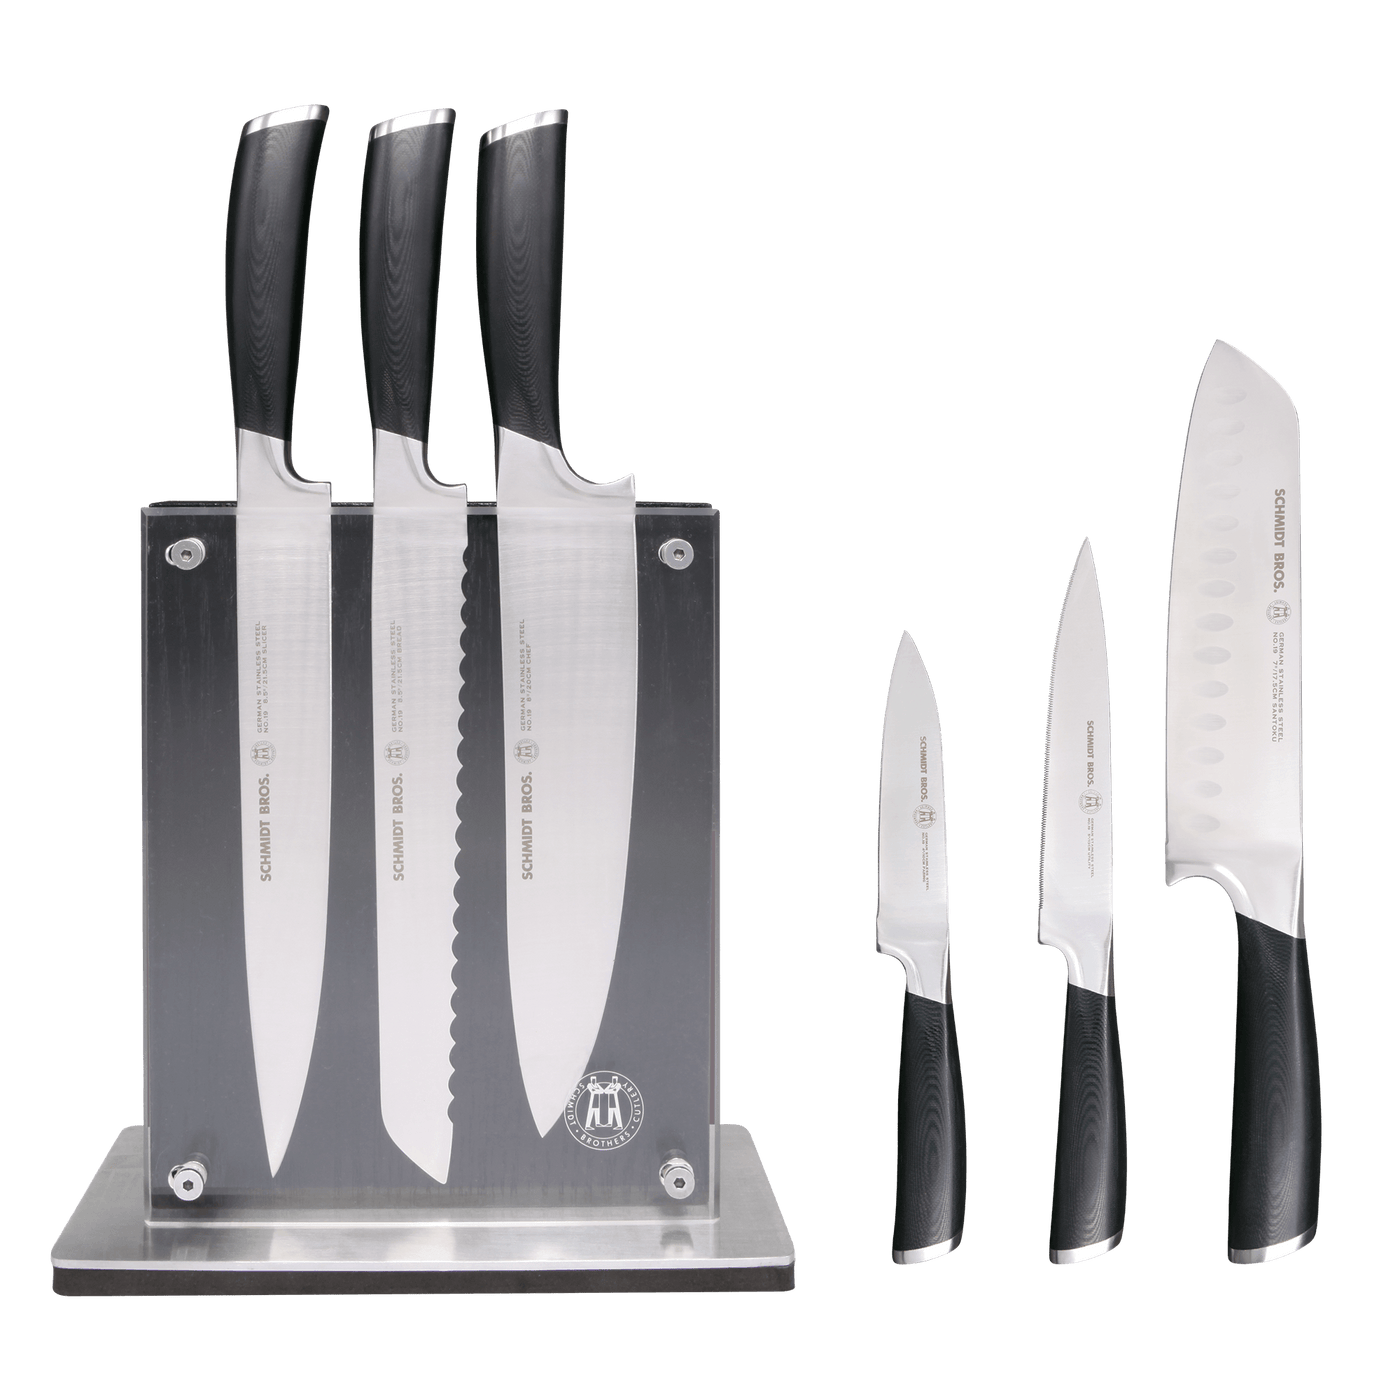 Schmidt Brothers Kitchen Cutlery Schmidt Brothers, Bonded Ash, 7-Piece Knife Set, High-Carbon Stainless Steel Cutlery with Black Ash Wood and Acrylic Magnetic Knife Block